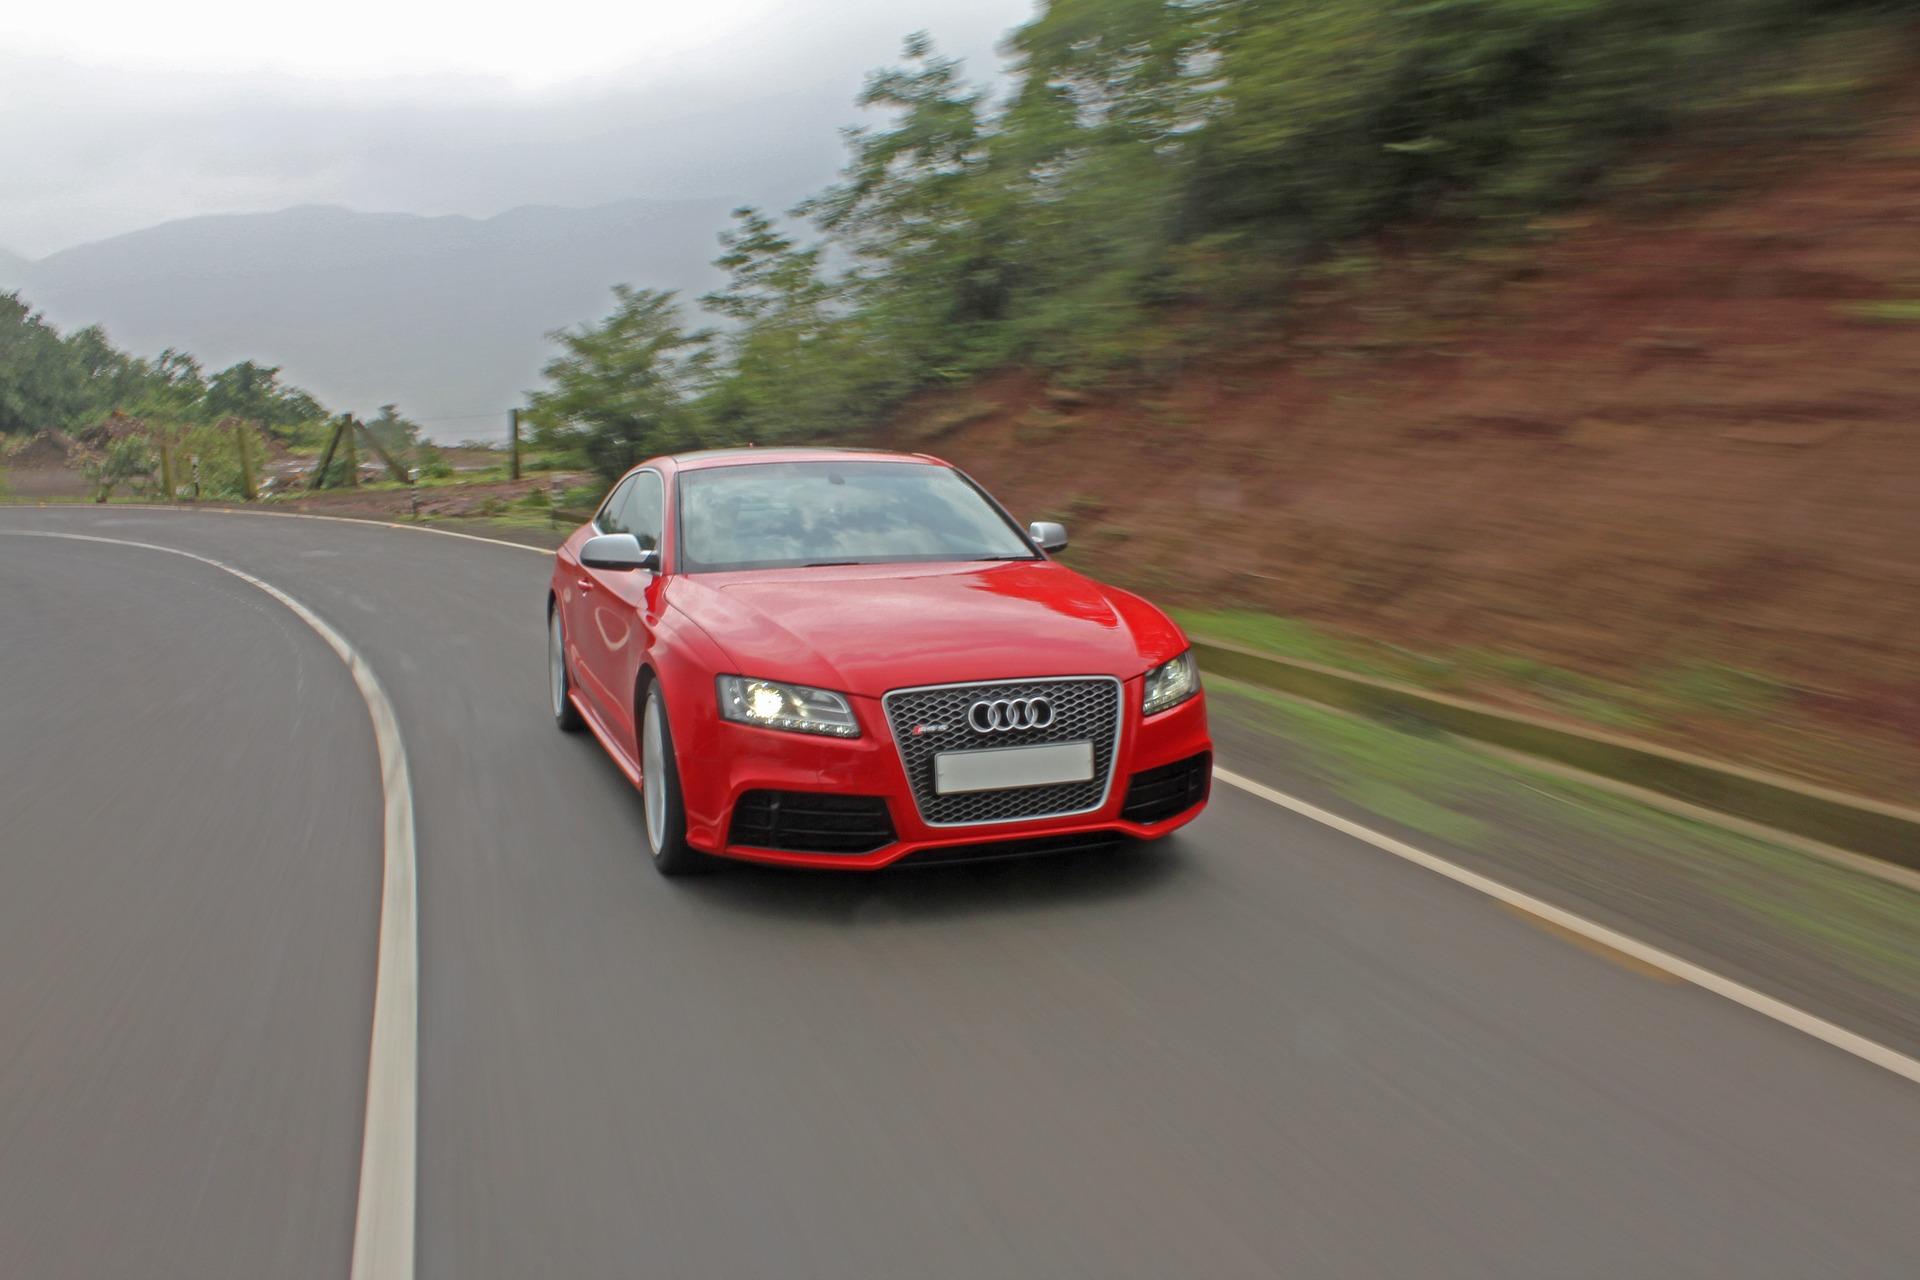 A red Audi driving along a road